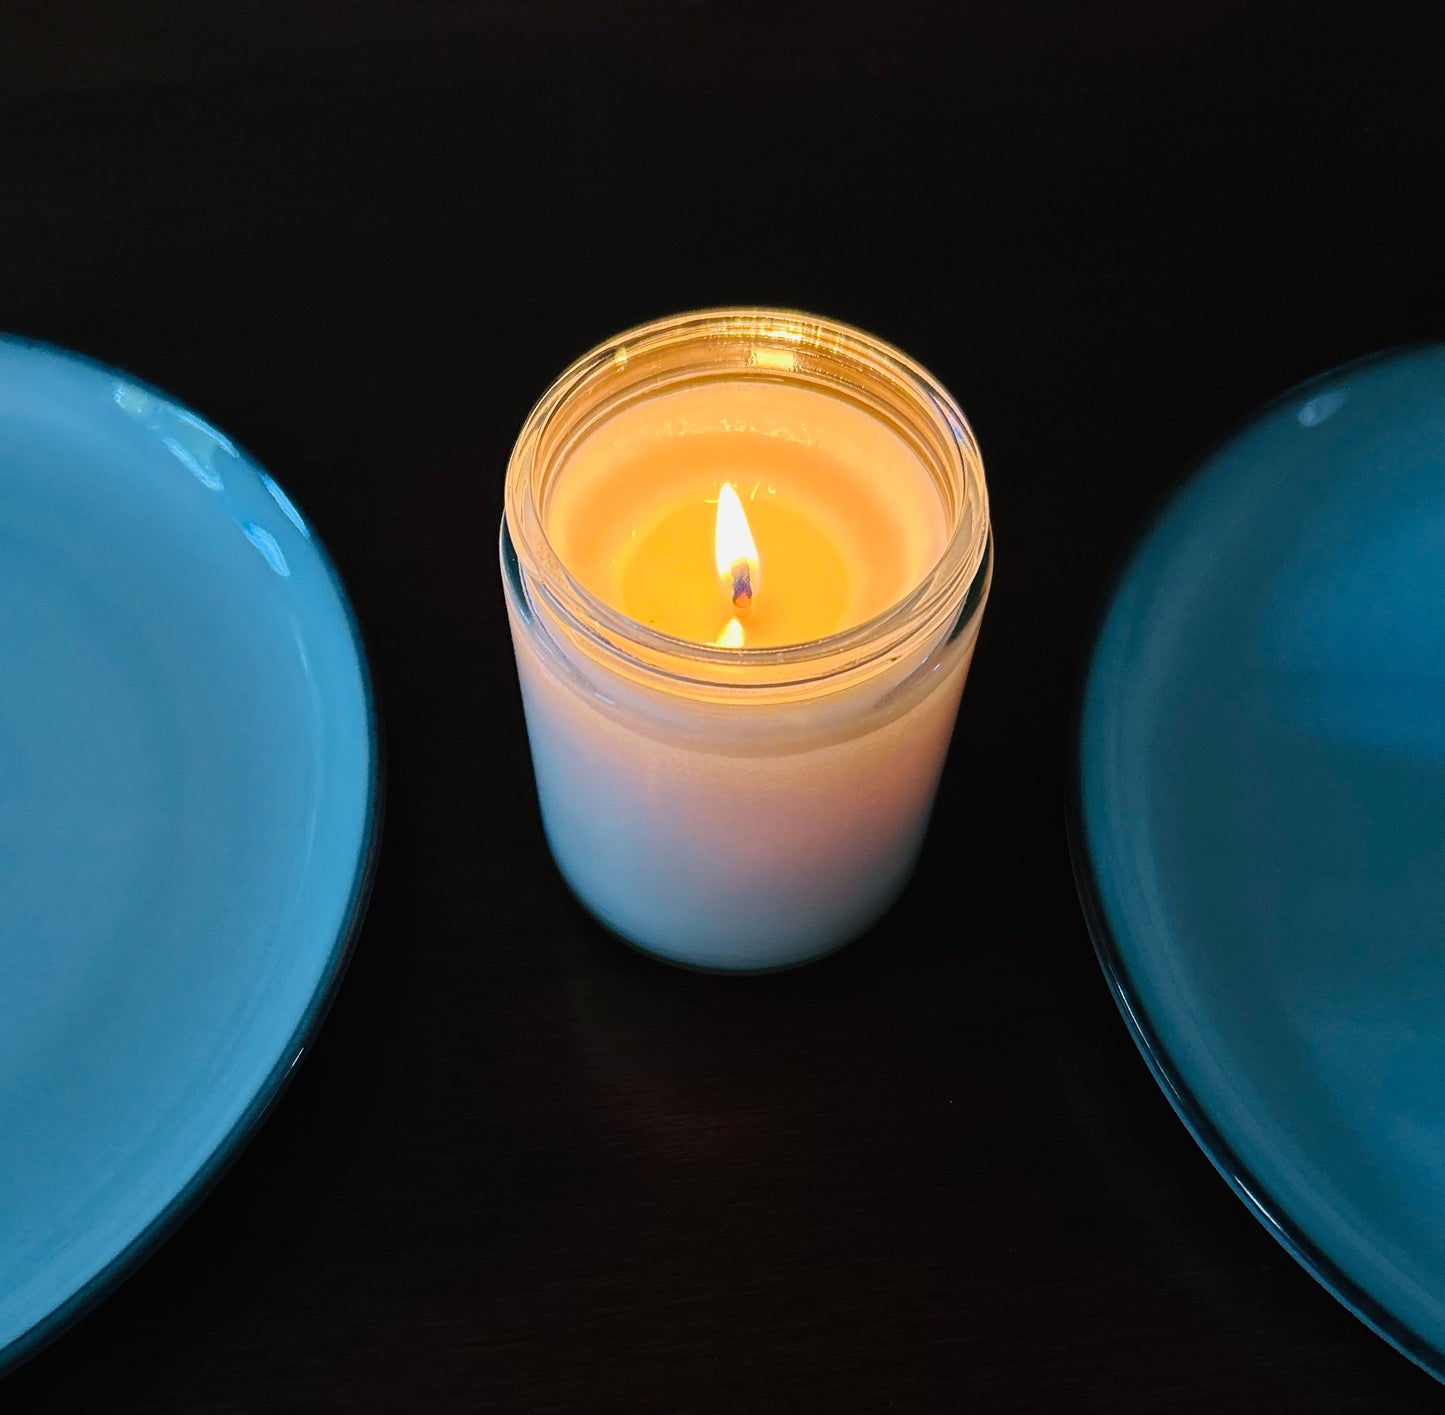 Unscented Soy Wax Candle